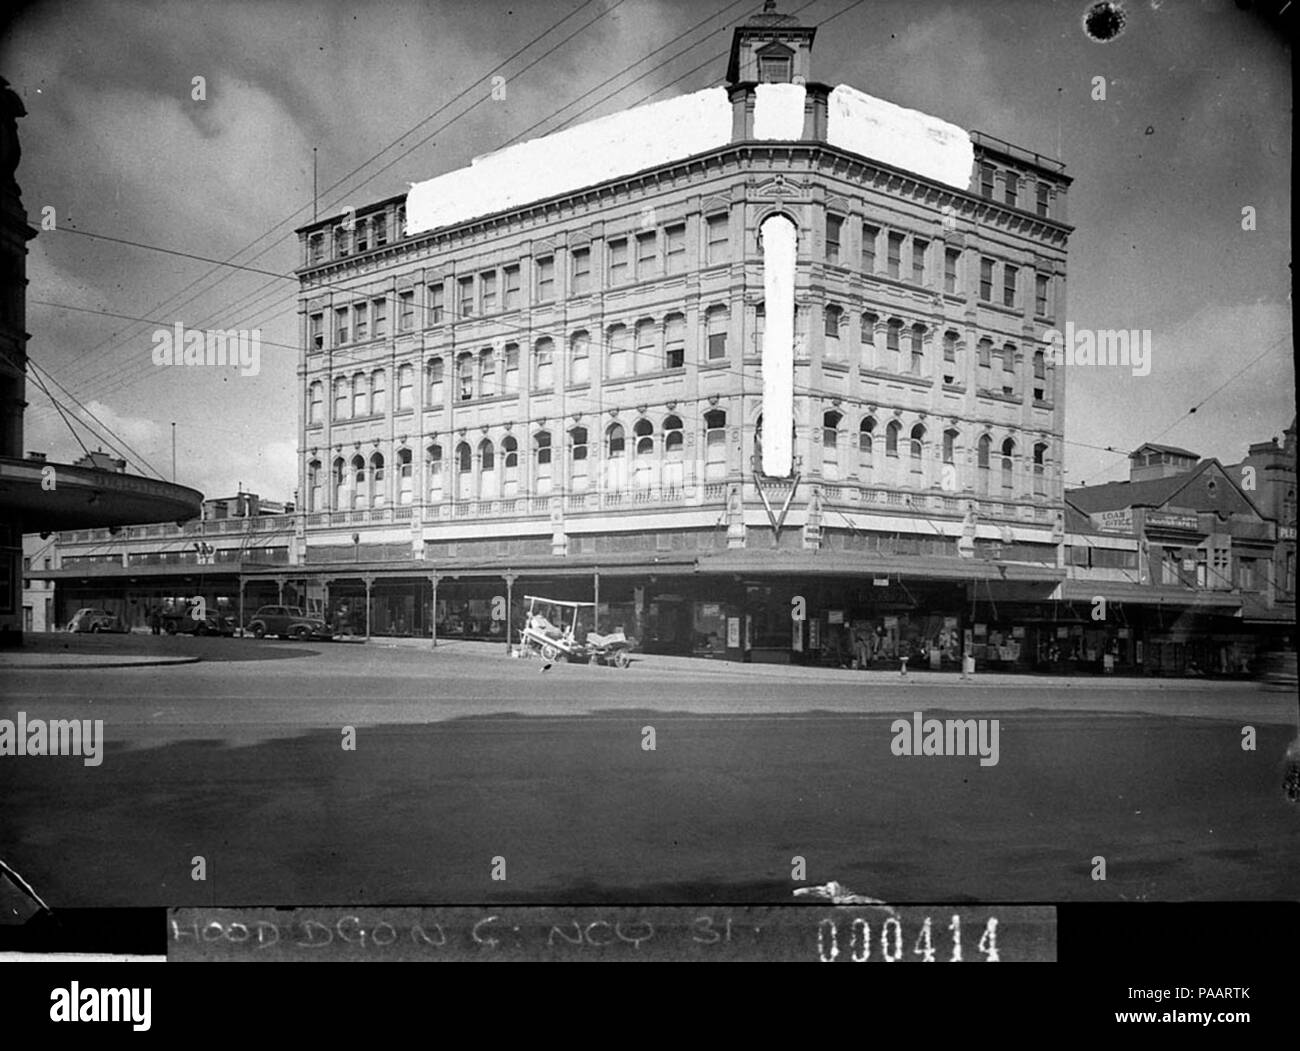 238 SLNSW 13002 Buckinghams Department Store Oxford Street Darlinghurst with V for Victory sign taken for Building Publishing Co Stock Photo